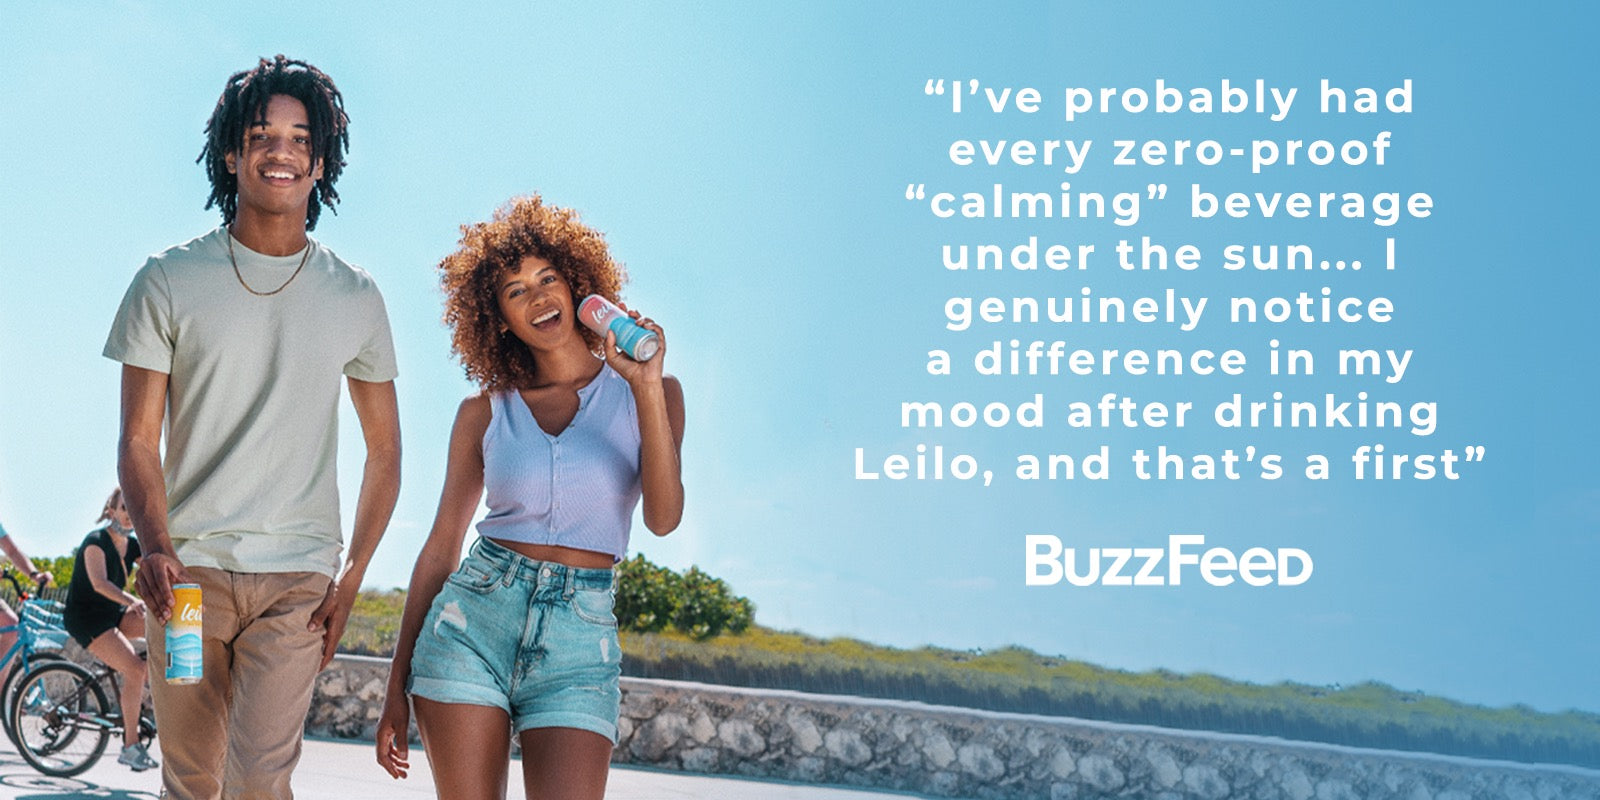 Buzzfeed claims that Leilo provides a genuine improvement in mood